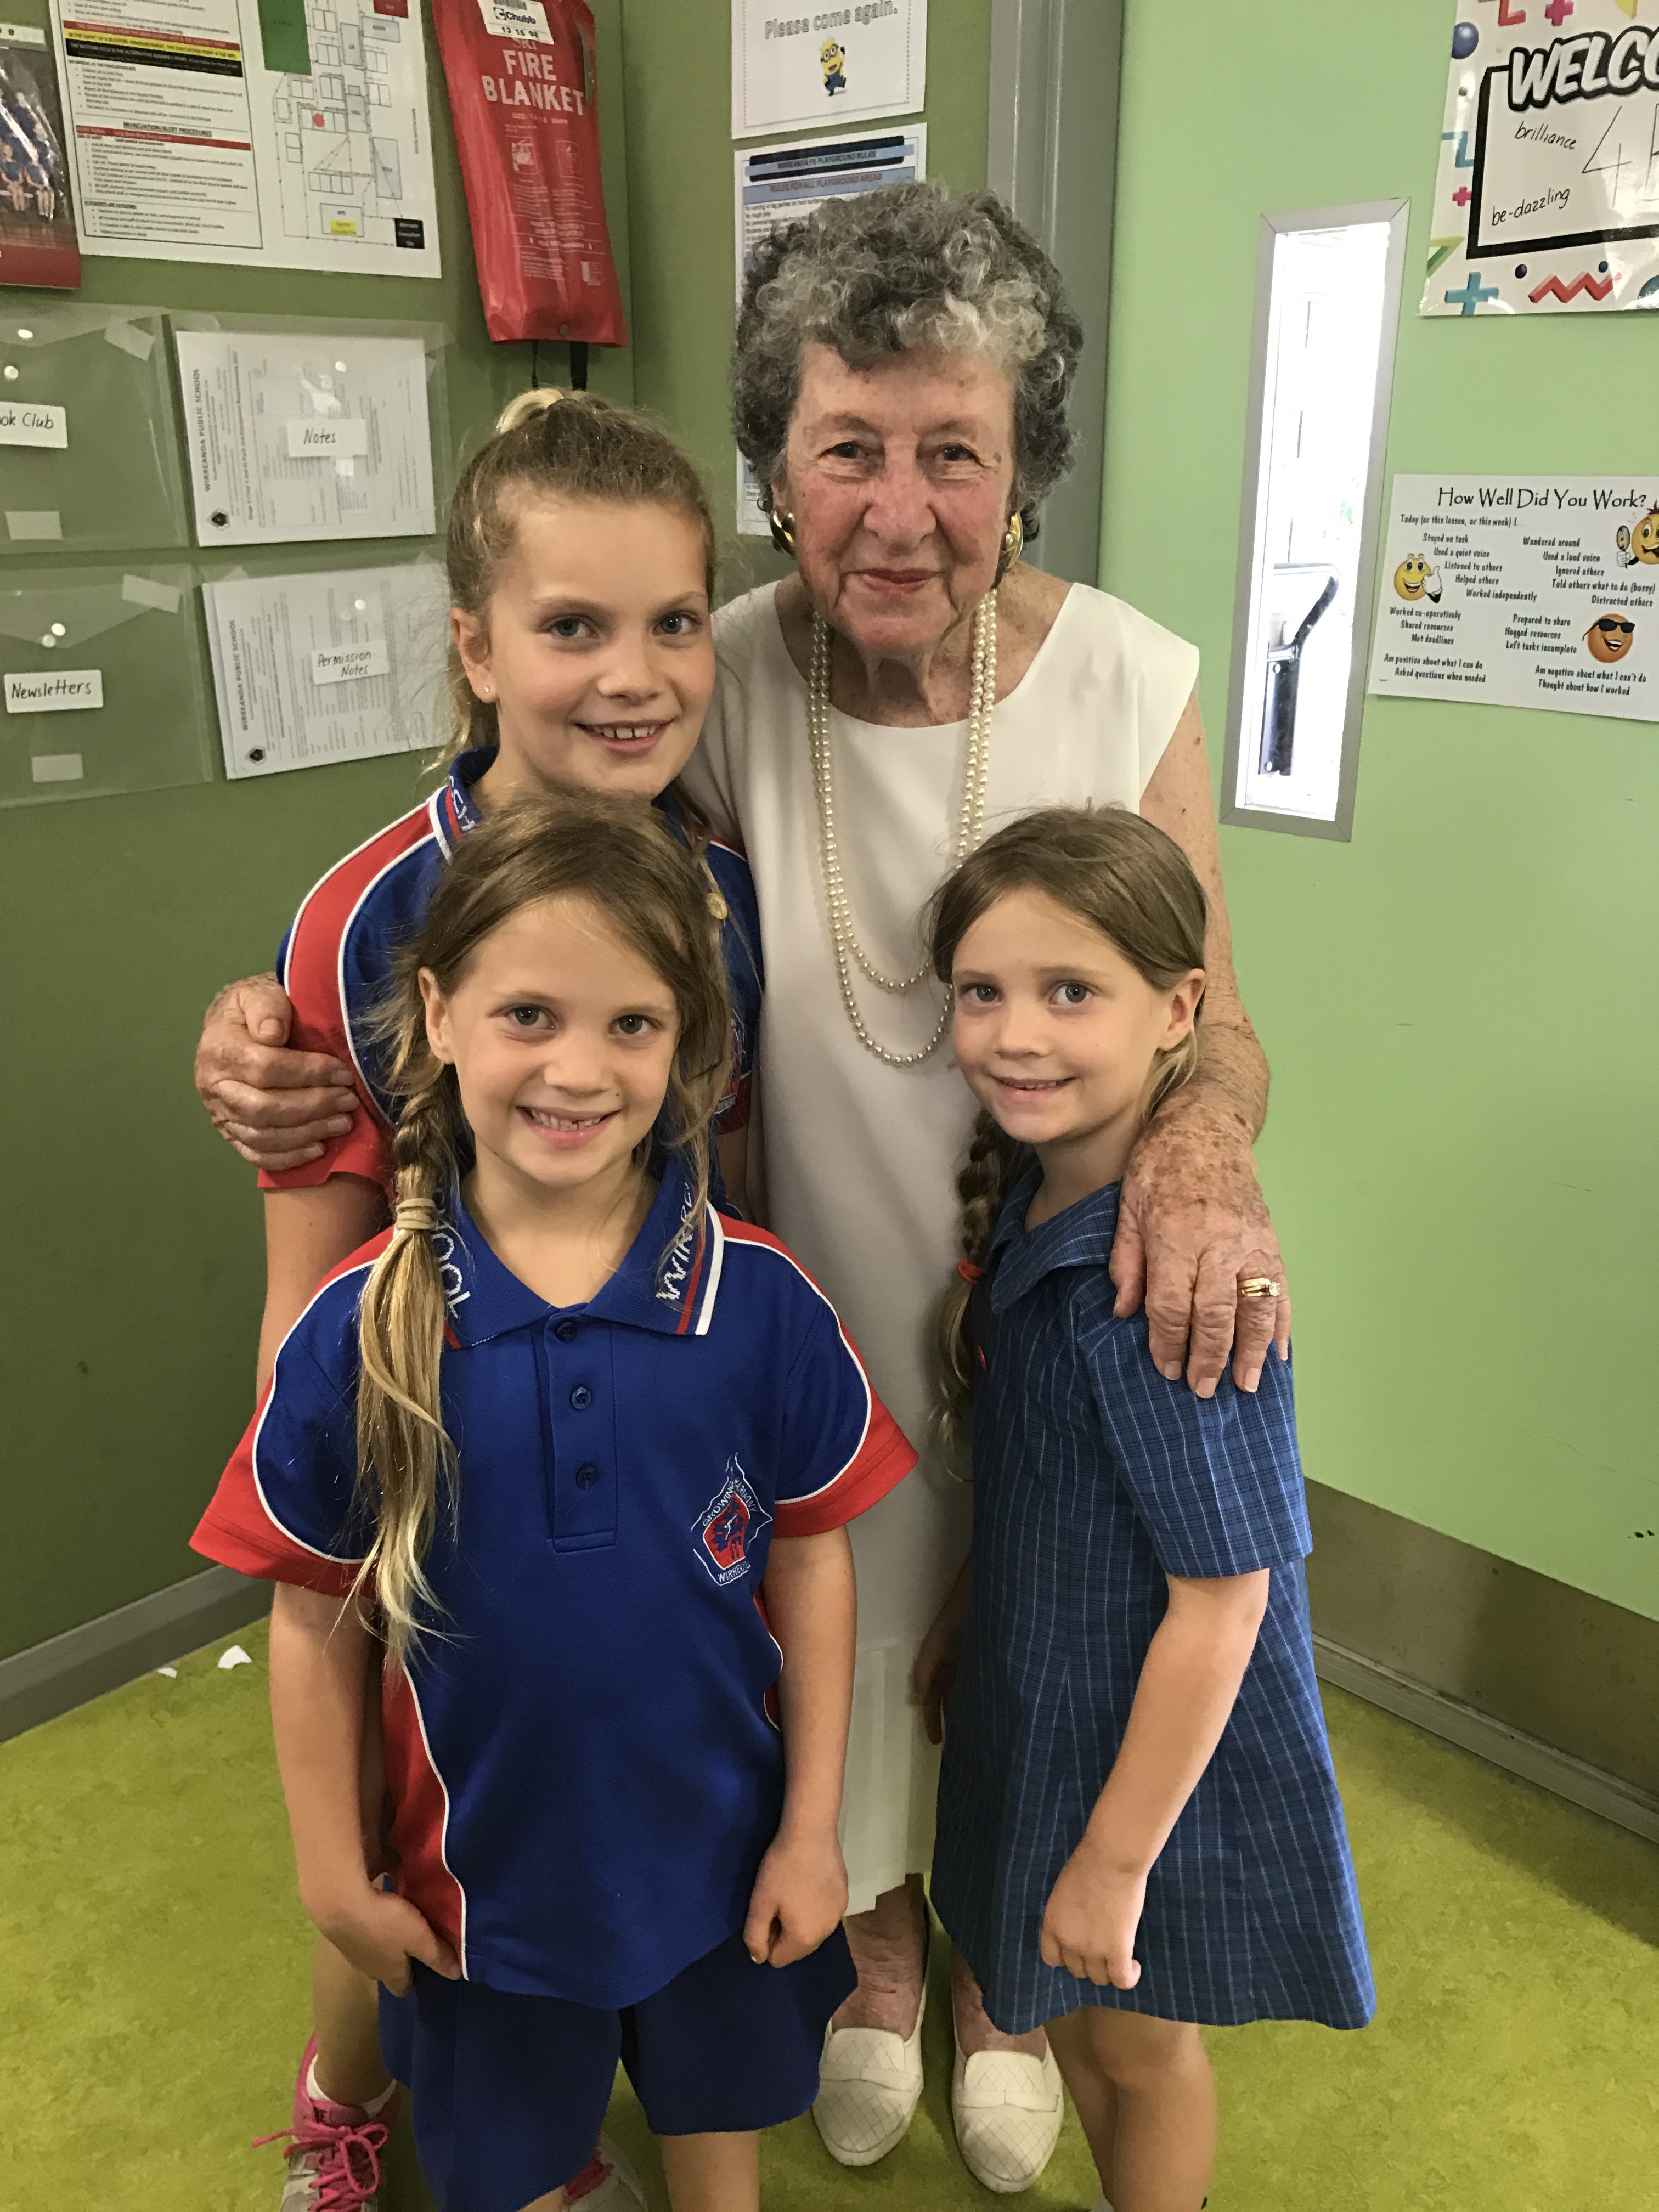 Lexi, Lucy and Lyla Magnee, with Great Nan Gwen Martin, 85 years old.